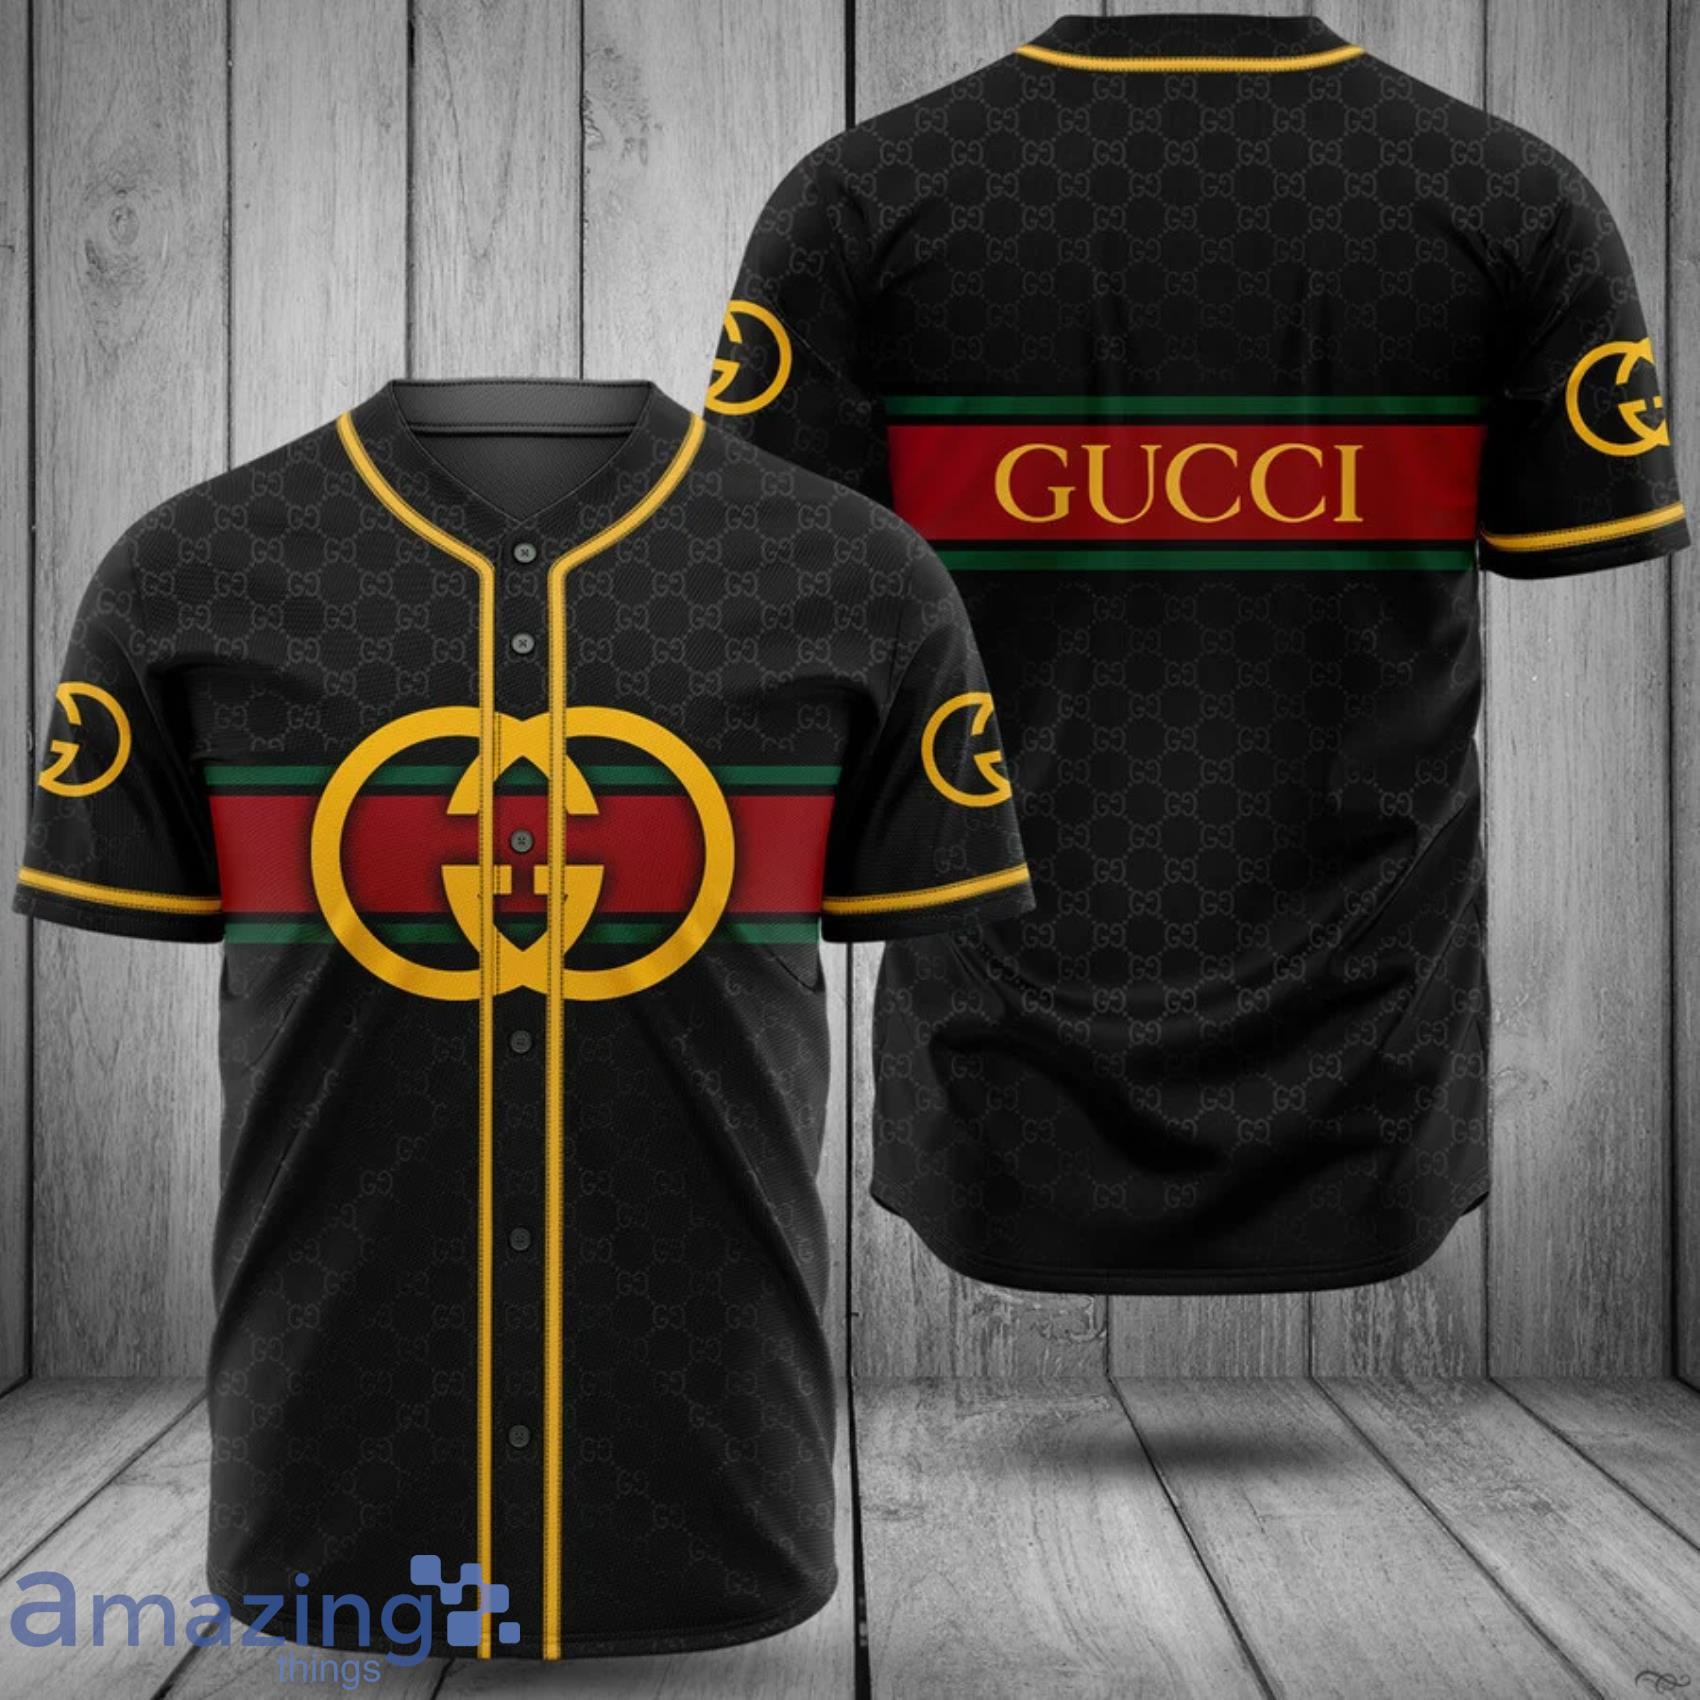 Gucci Black 3 Baseball Jersey Clothes Sport For Women